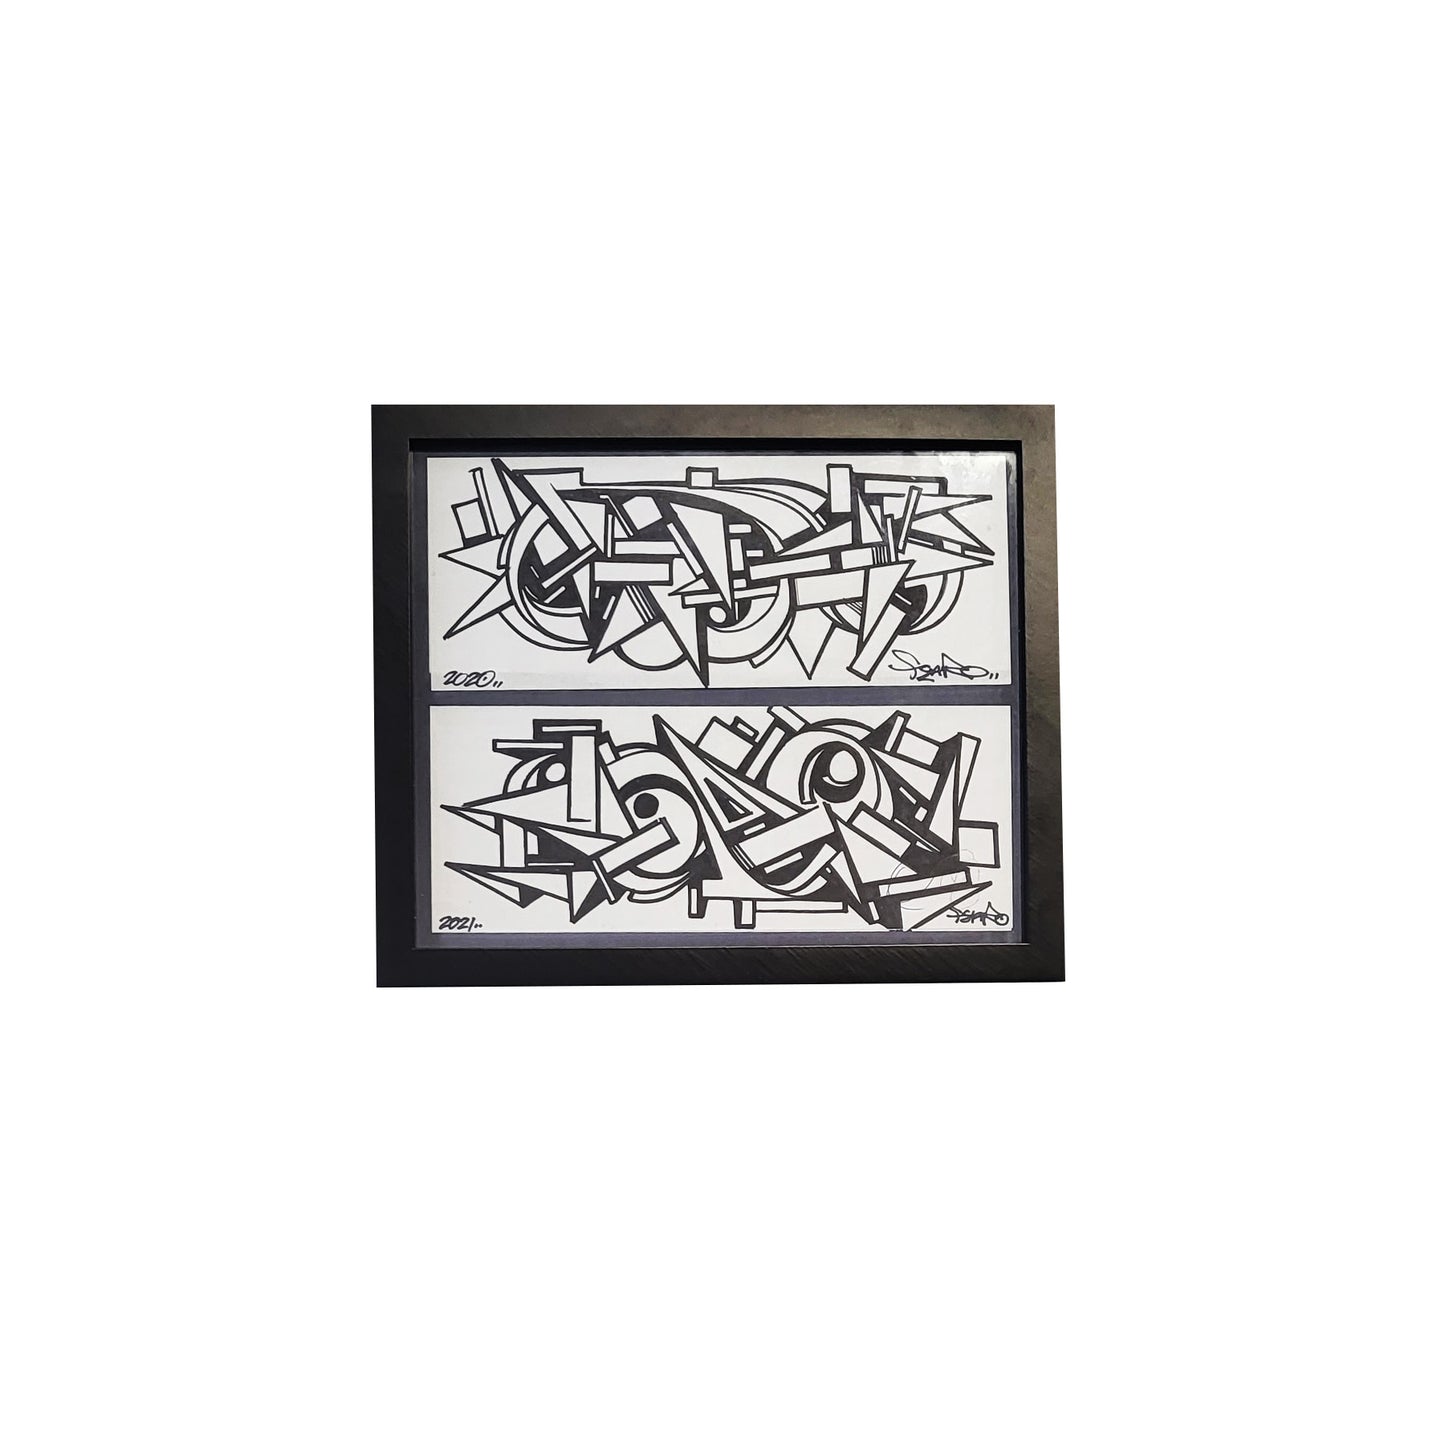 Black framed art piece, separated in two rectangles, on on top and bottom. Both rectangles are filled with abstract angles in black ink on white paper.